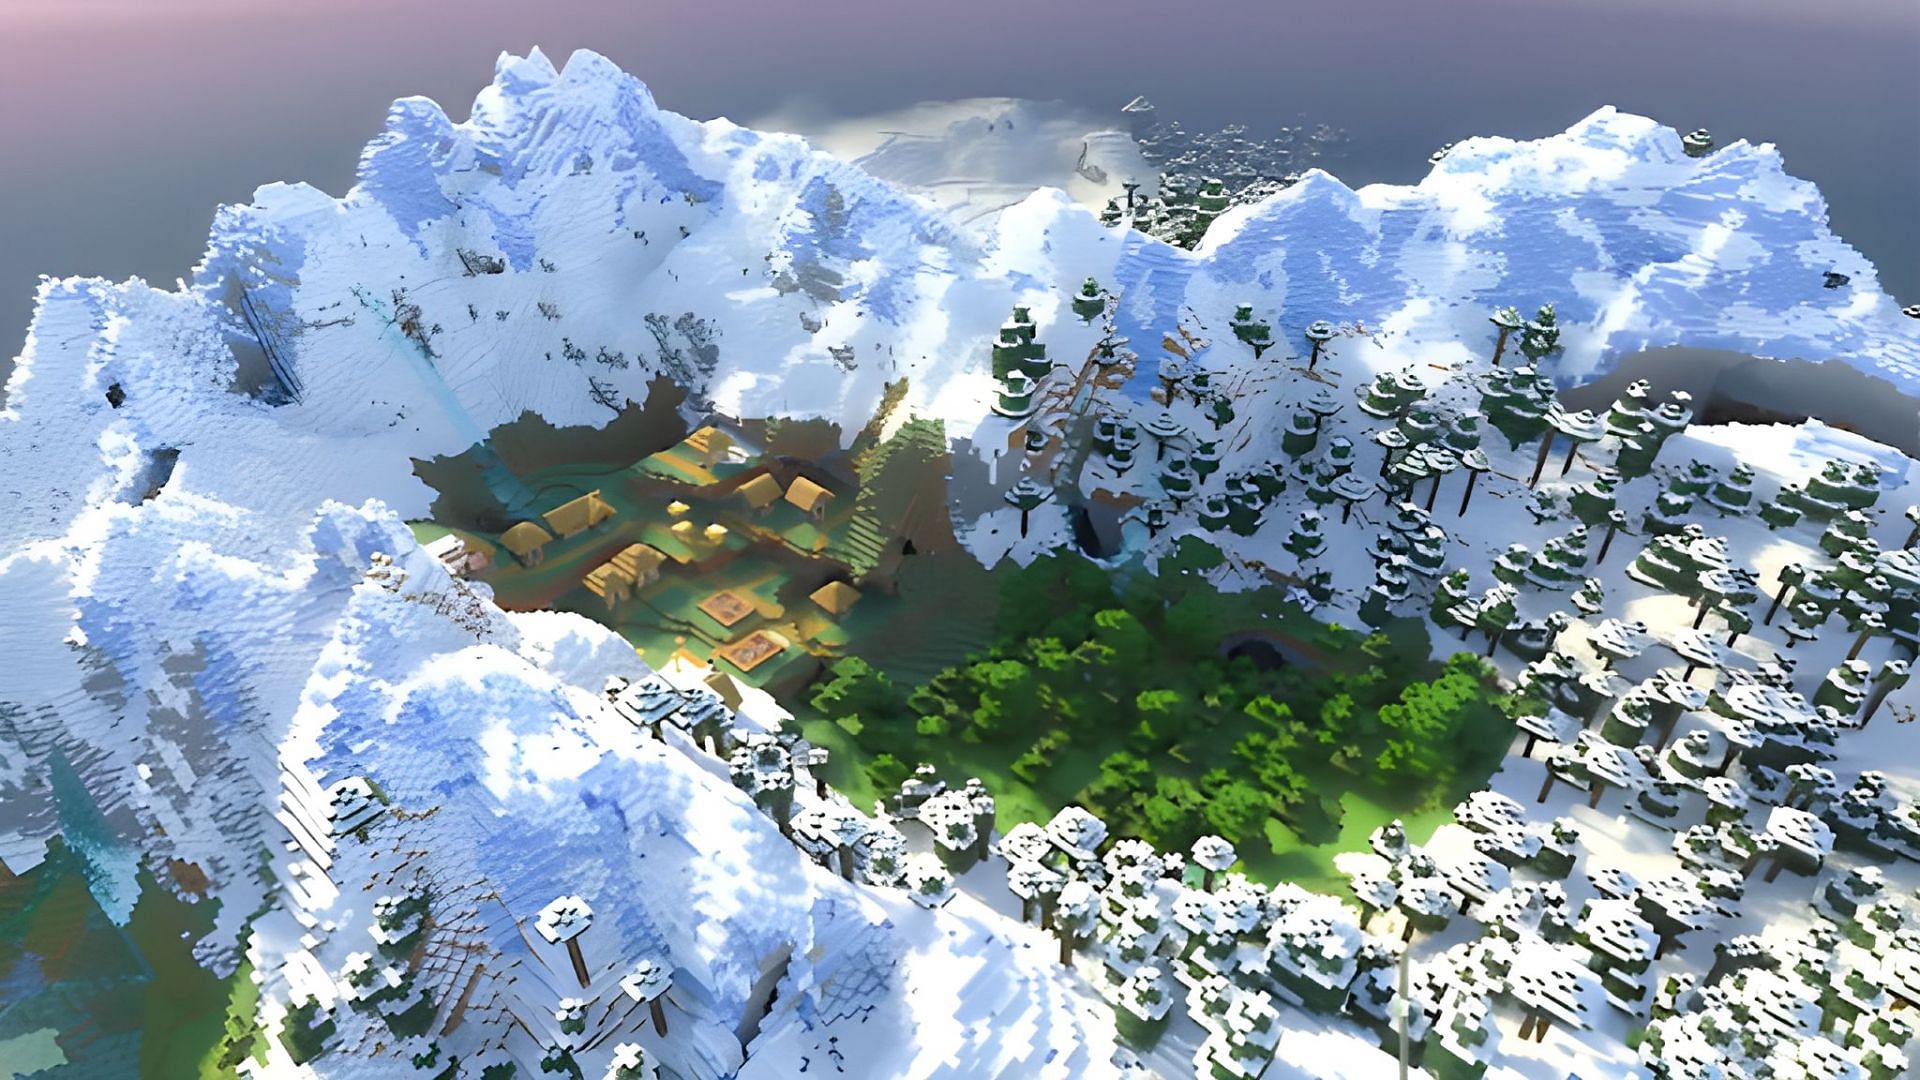 The snowy village looks amazing in this seed (Image via Mojang)